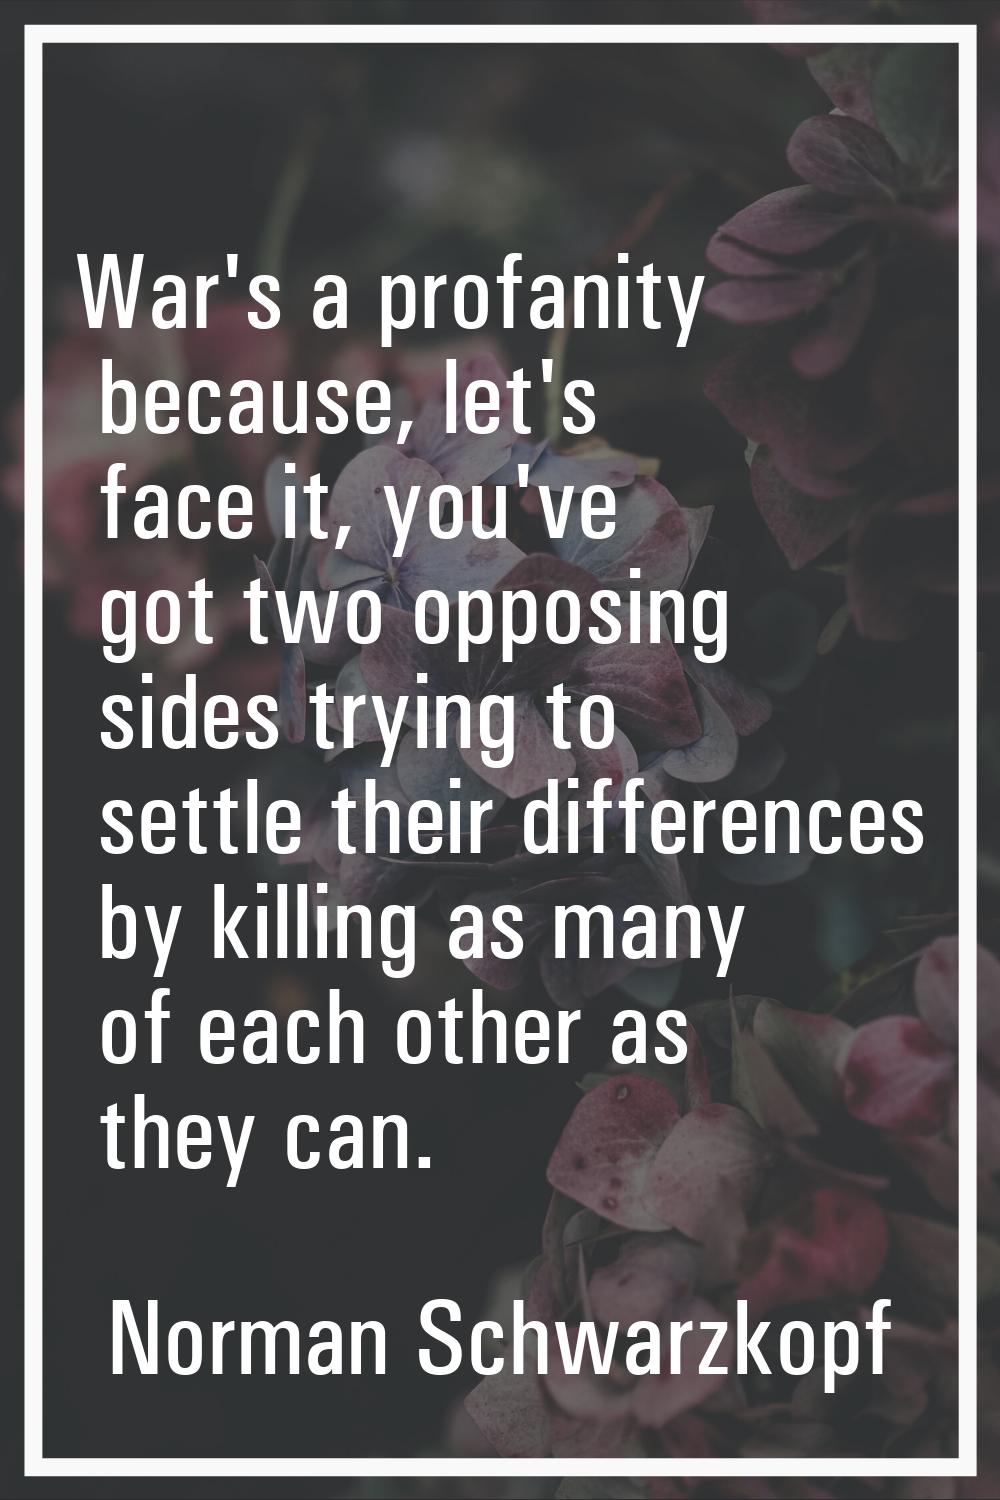 War's a profanity because, let's face it, you've got two opposing sides trying to settle their diff